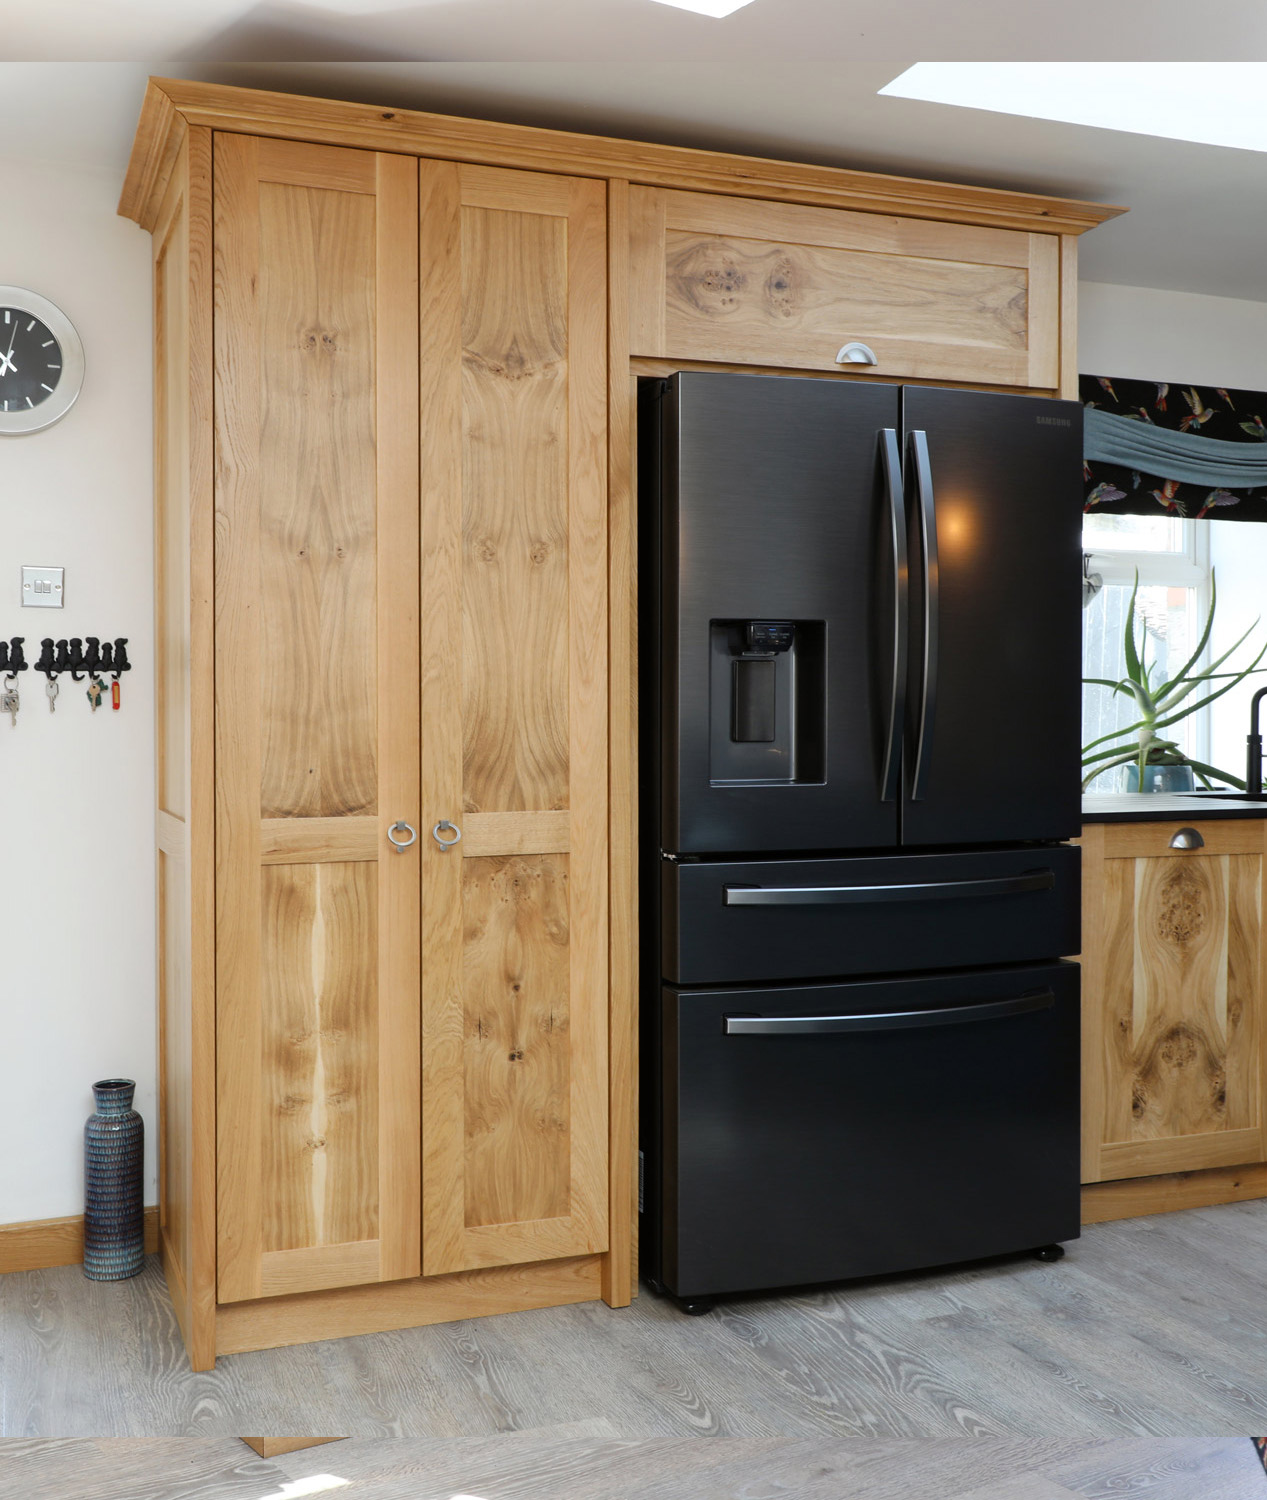 Character oak cupboards with integrated american style fridge